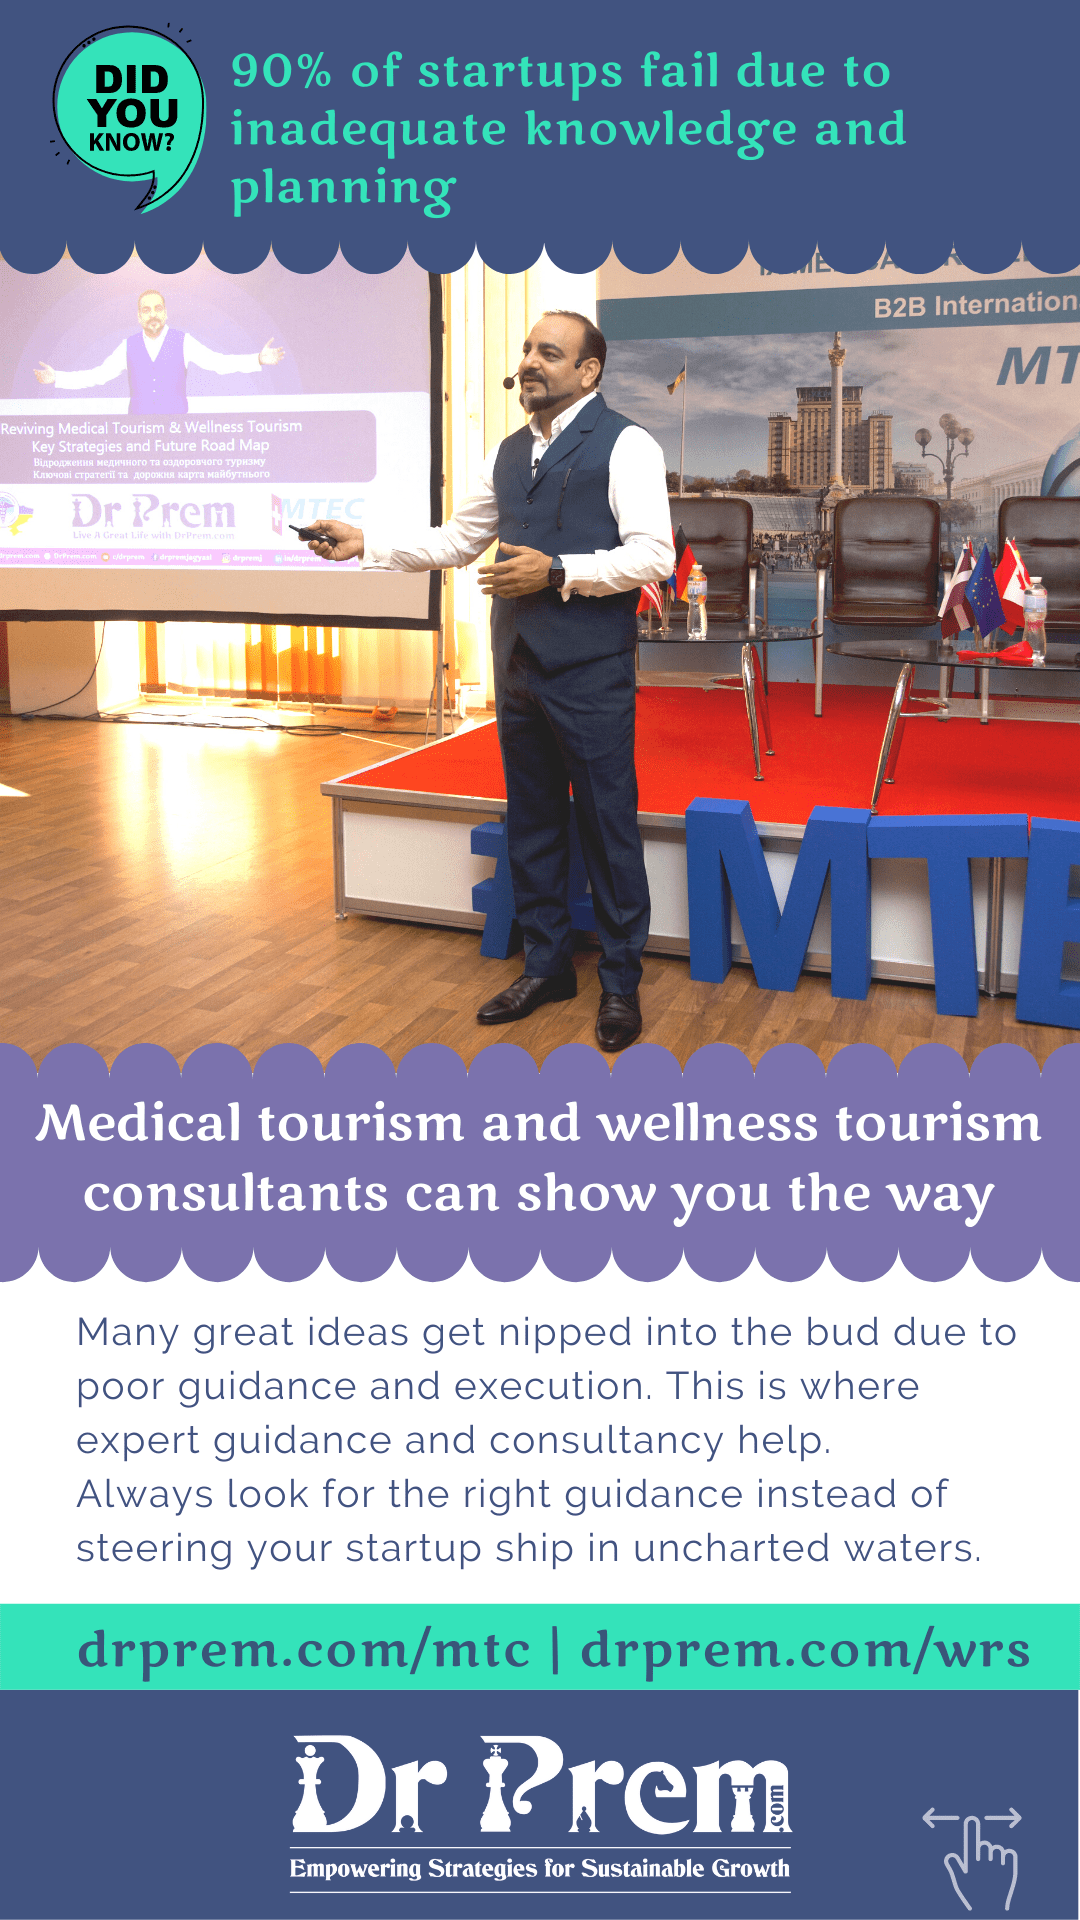 Why should you start your medical tourism and wellness tourism business now - 13